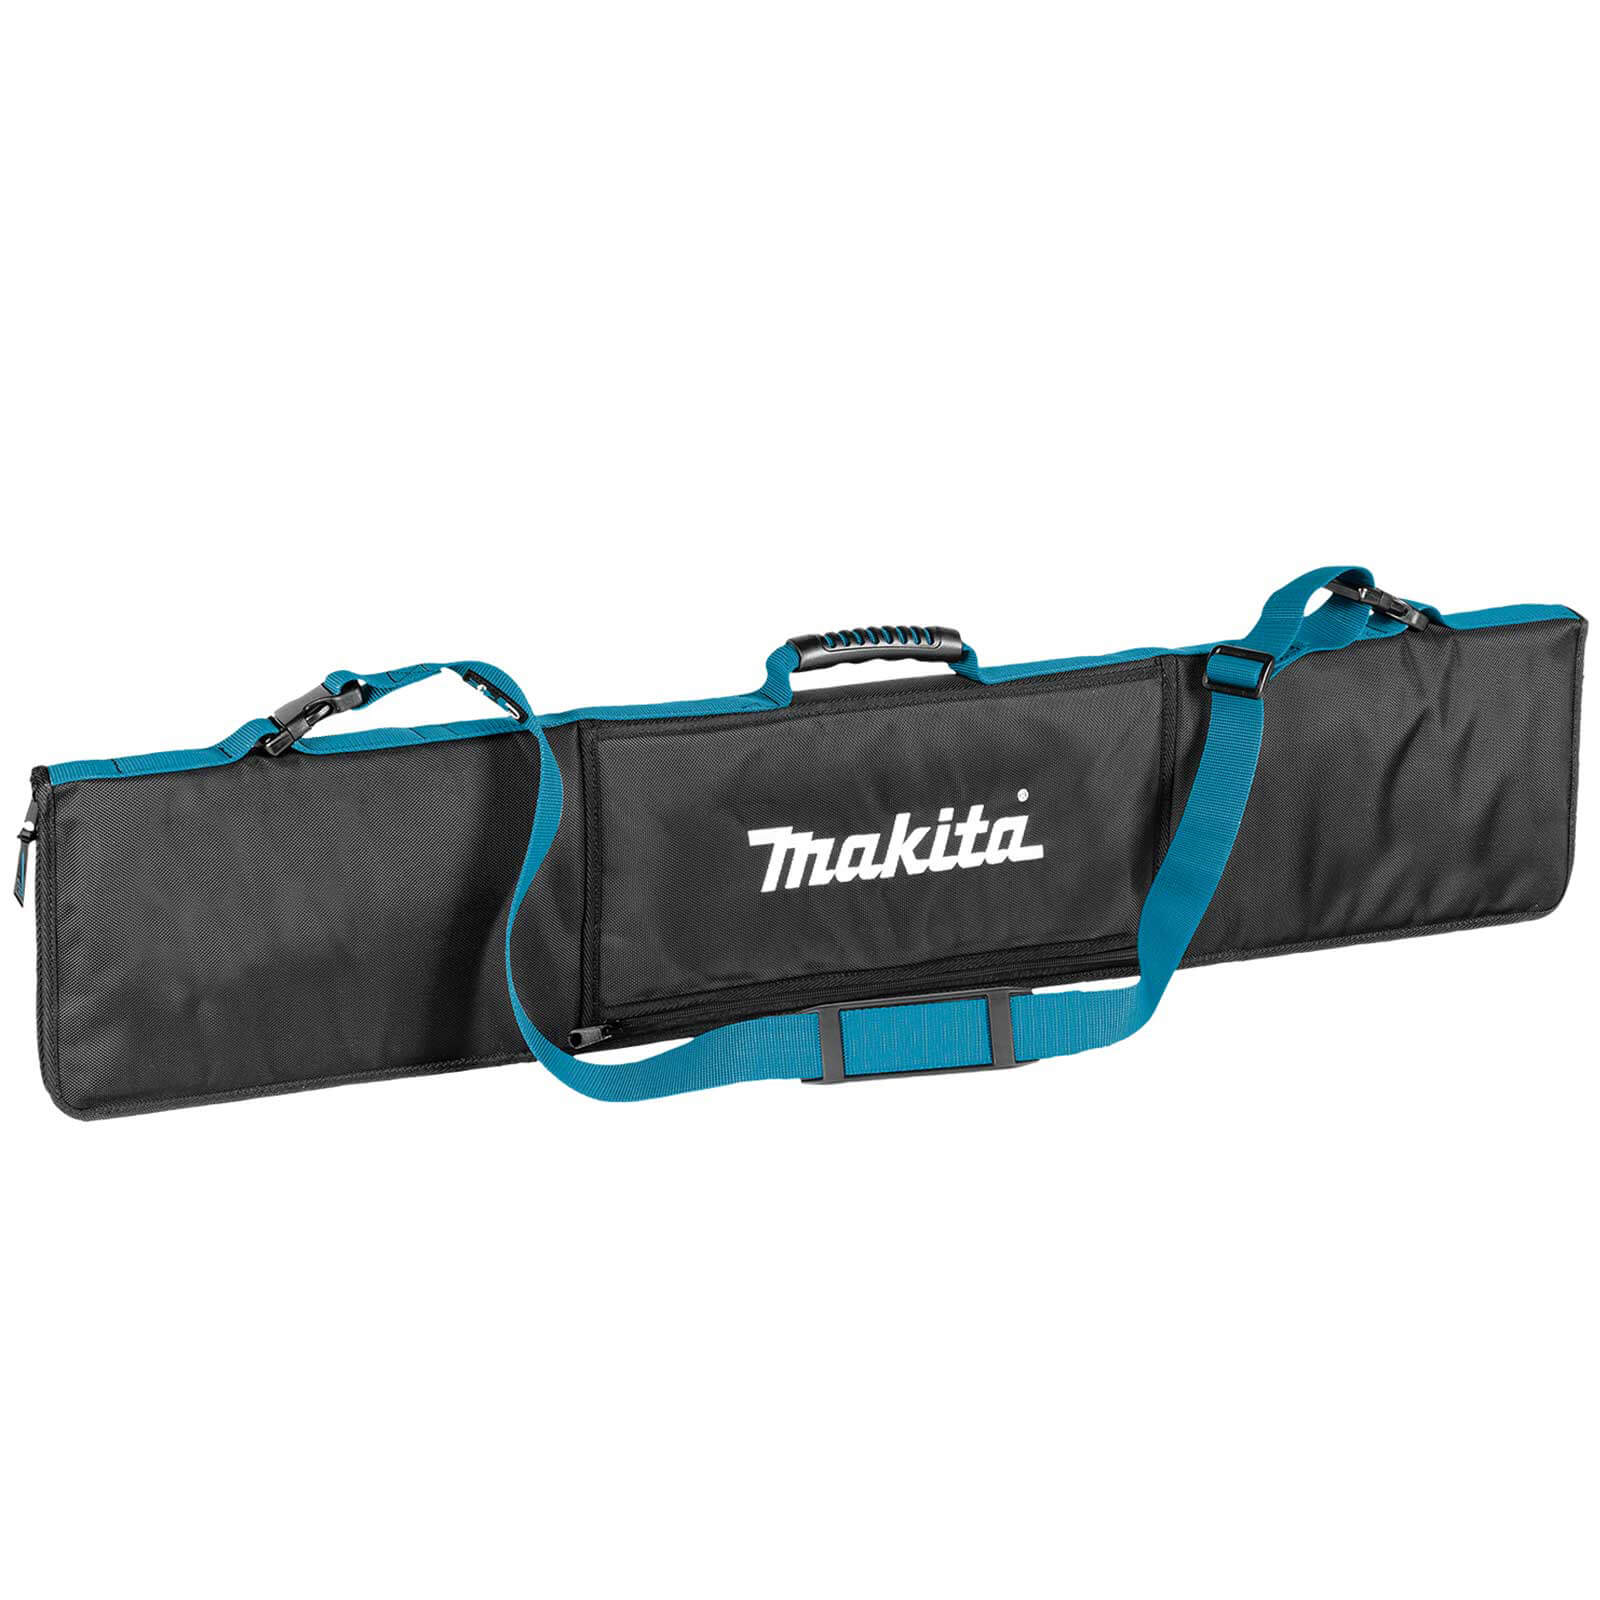 Makita Plunge Saw Guide Rail Carry Bag 1000mm